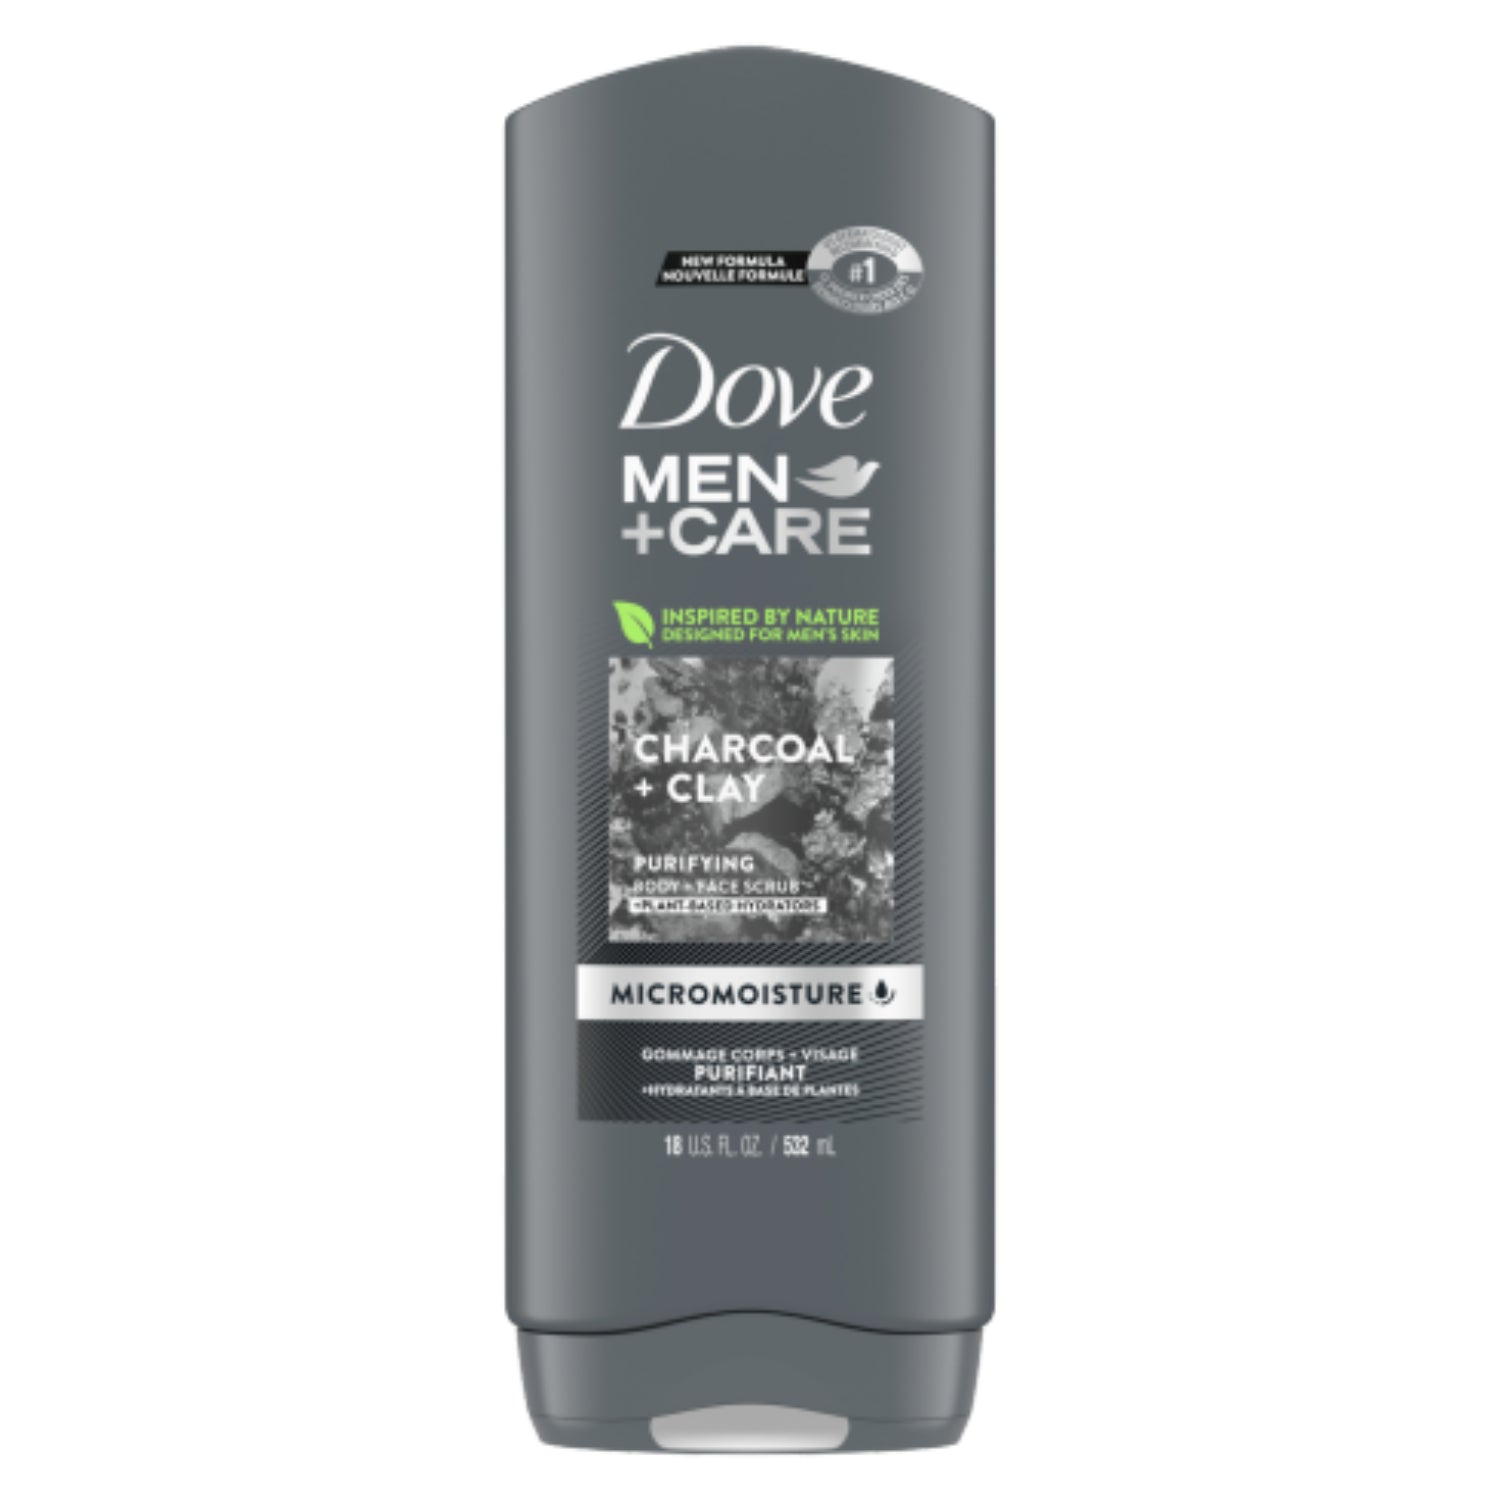 DOVE MEN + CARE Elements Body Wash Charcoal + Clay, Effectively